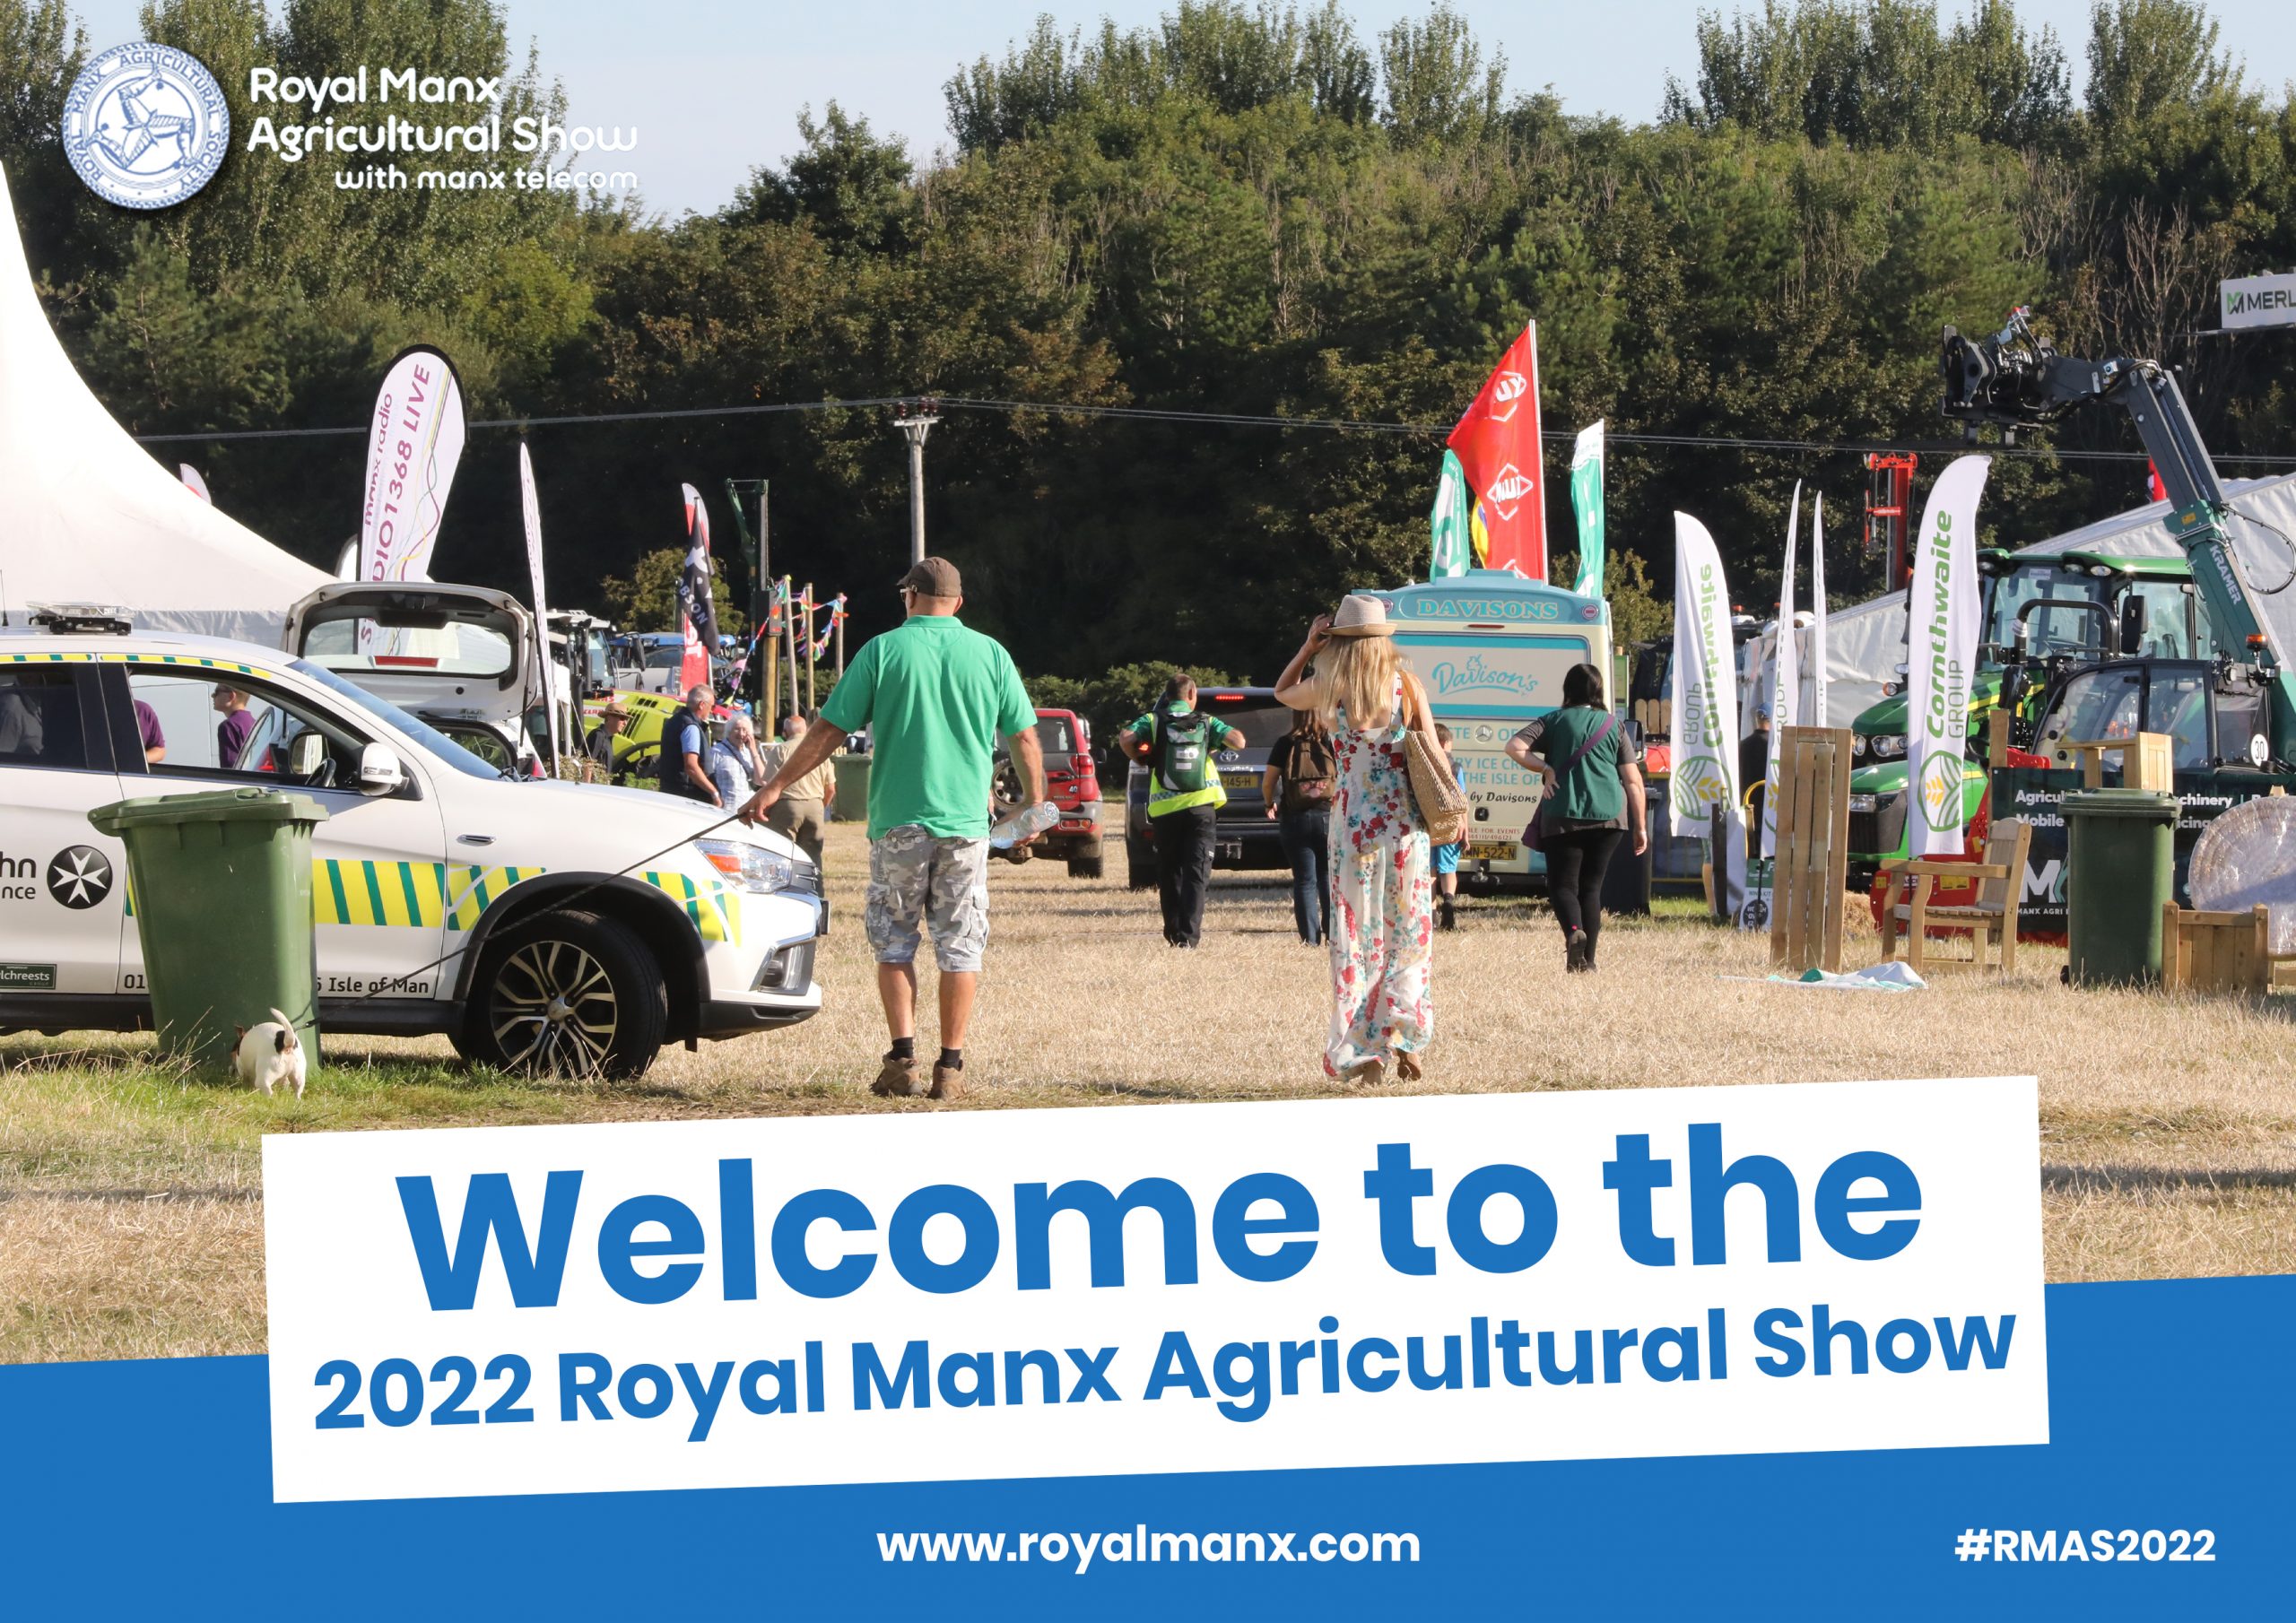 Welcome to the Royal Manx Agricultural Show 2022